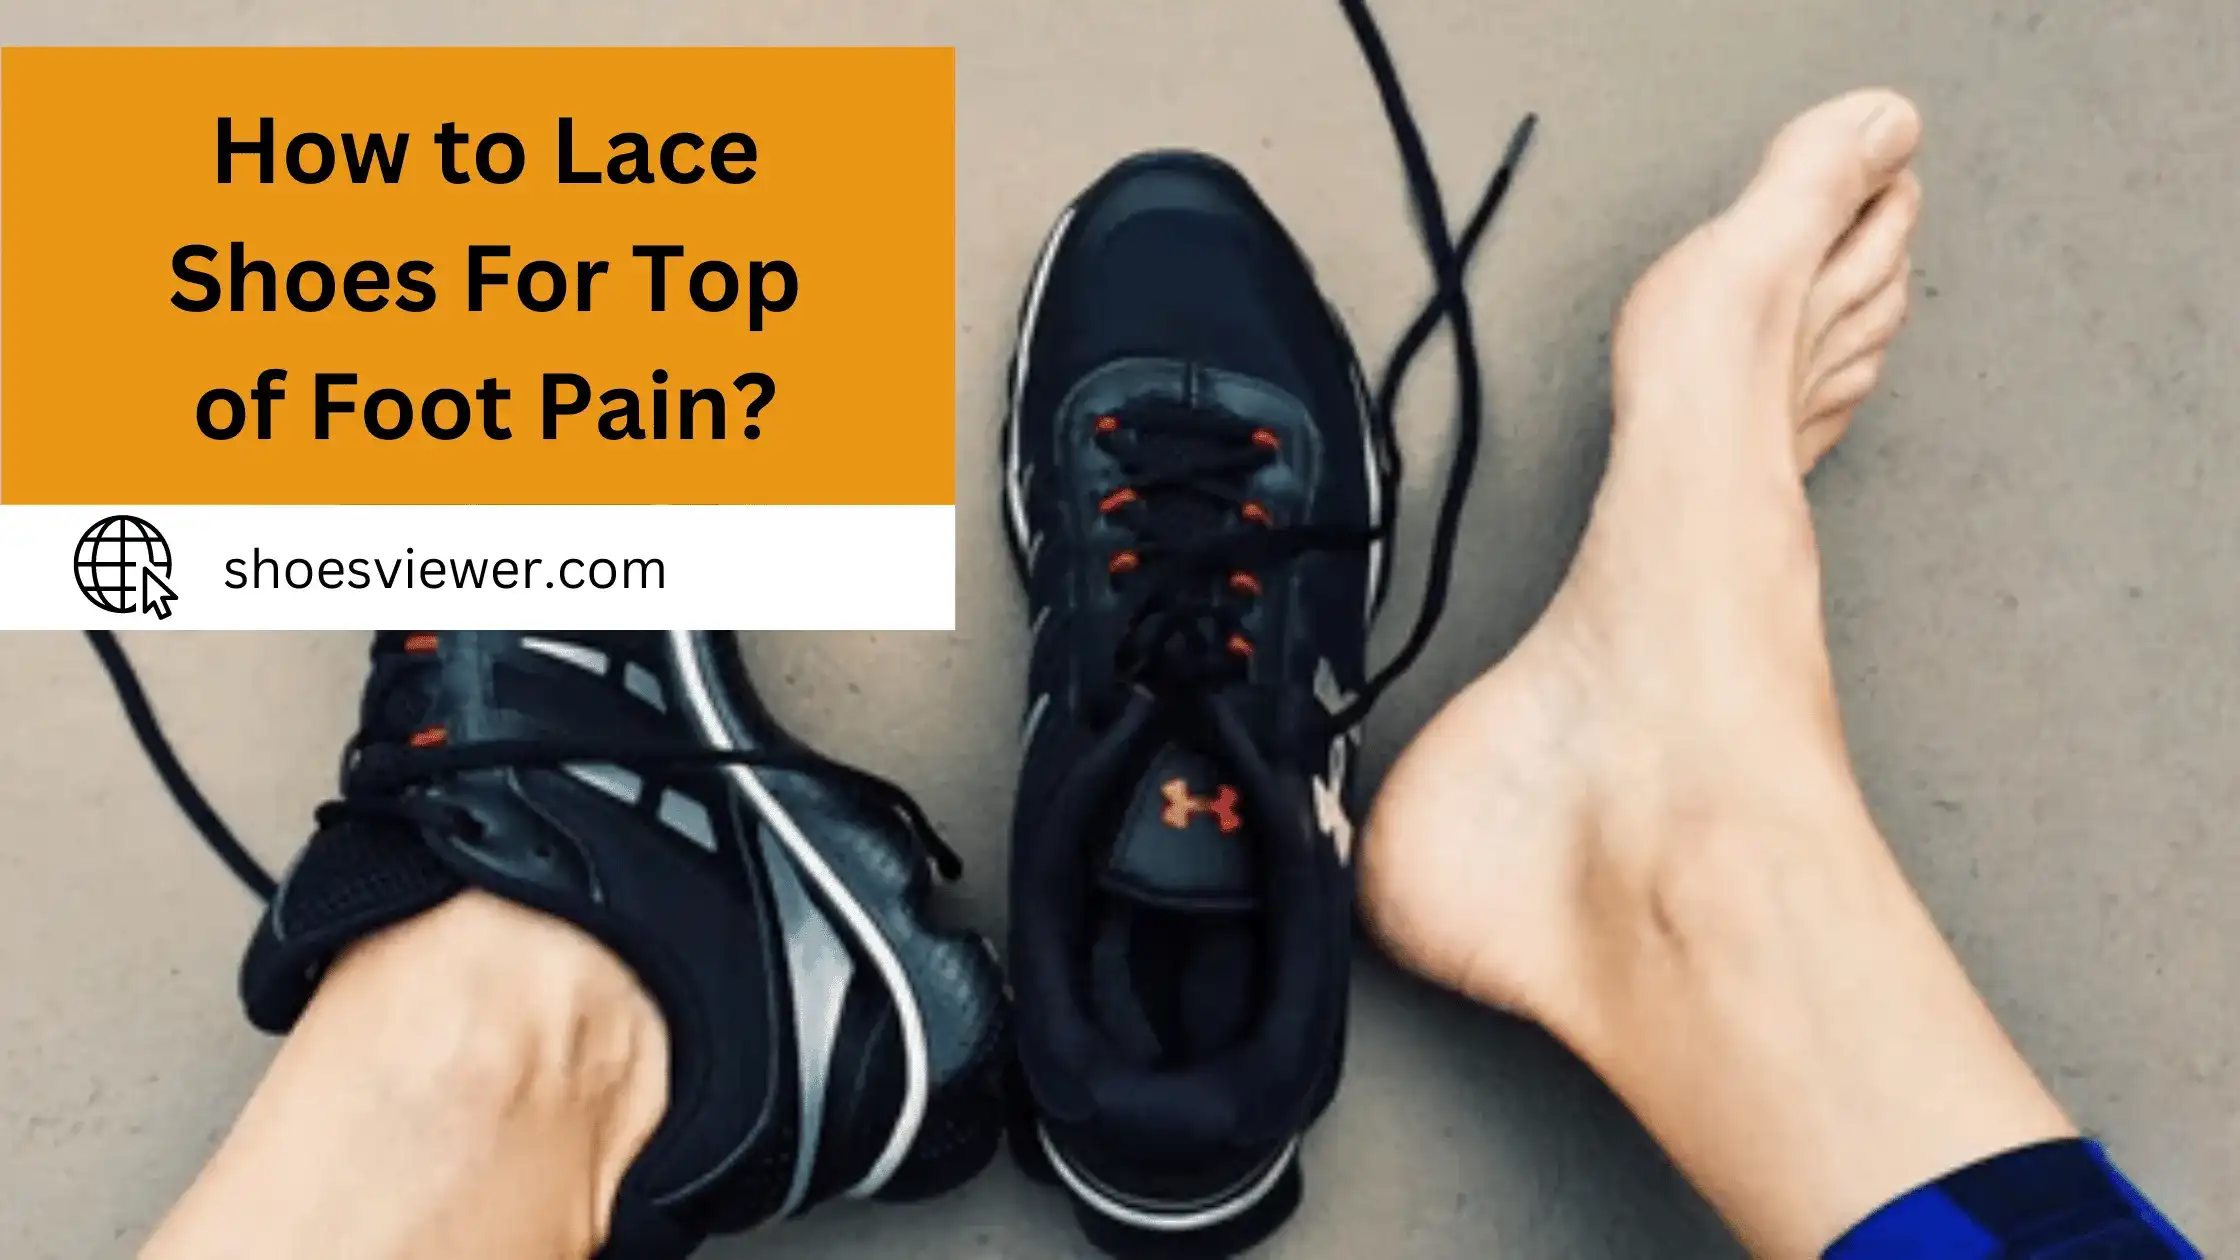 How To Lace Shoes For Top Of Foot Pain.webp